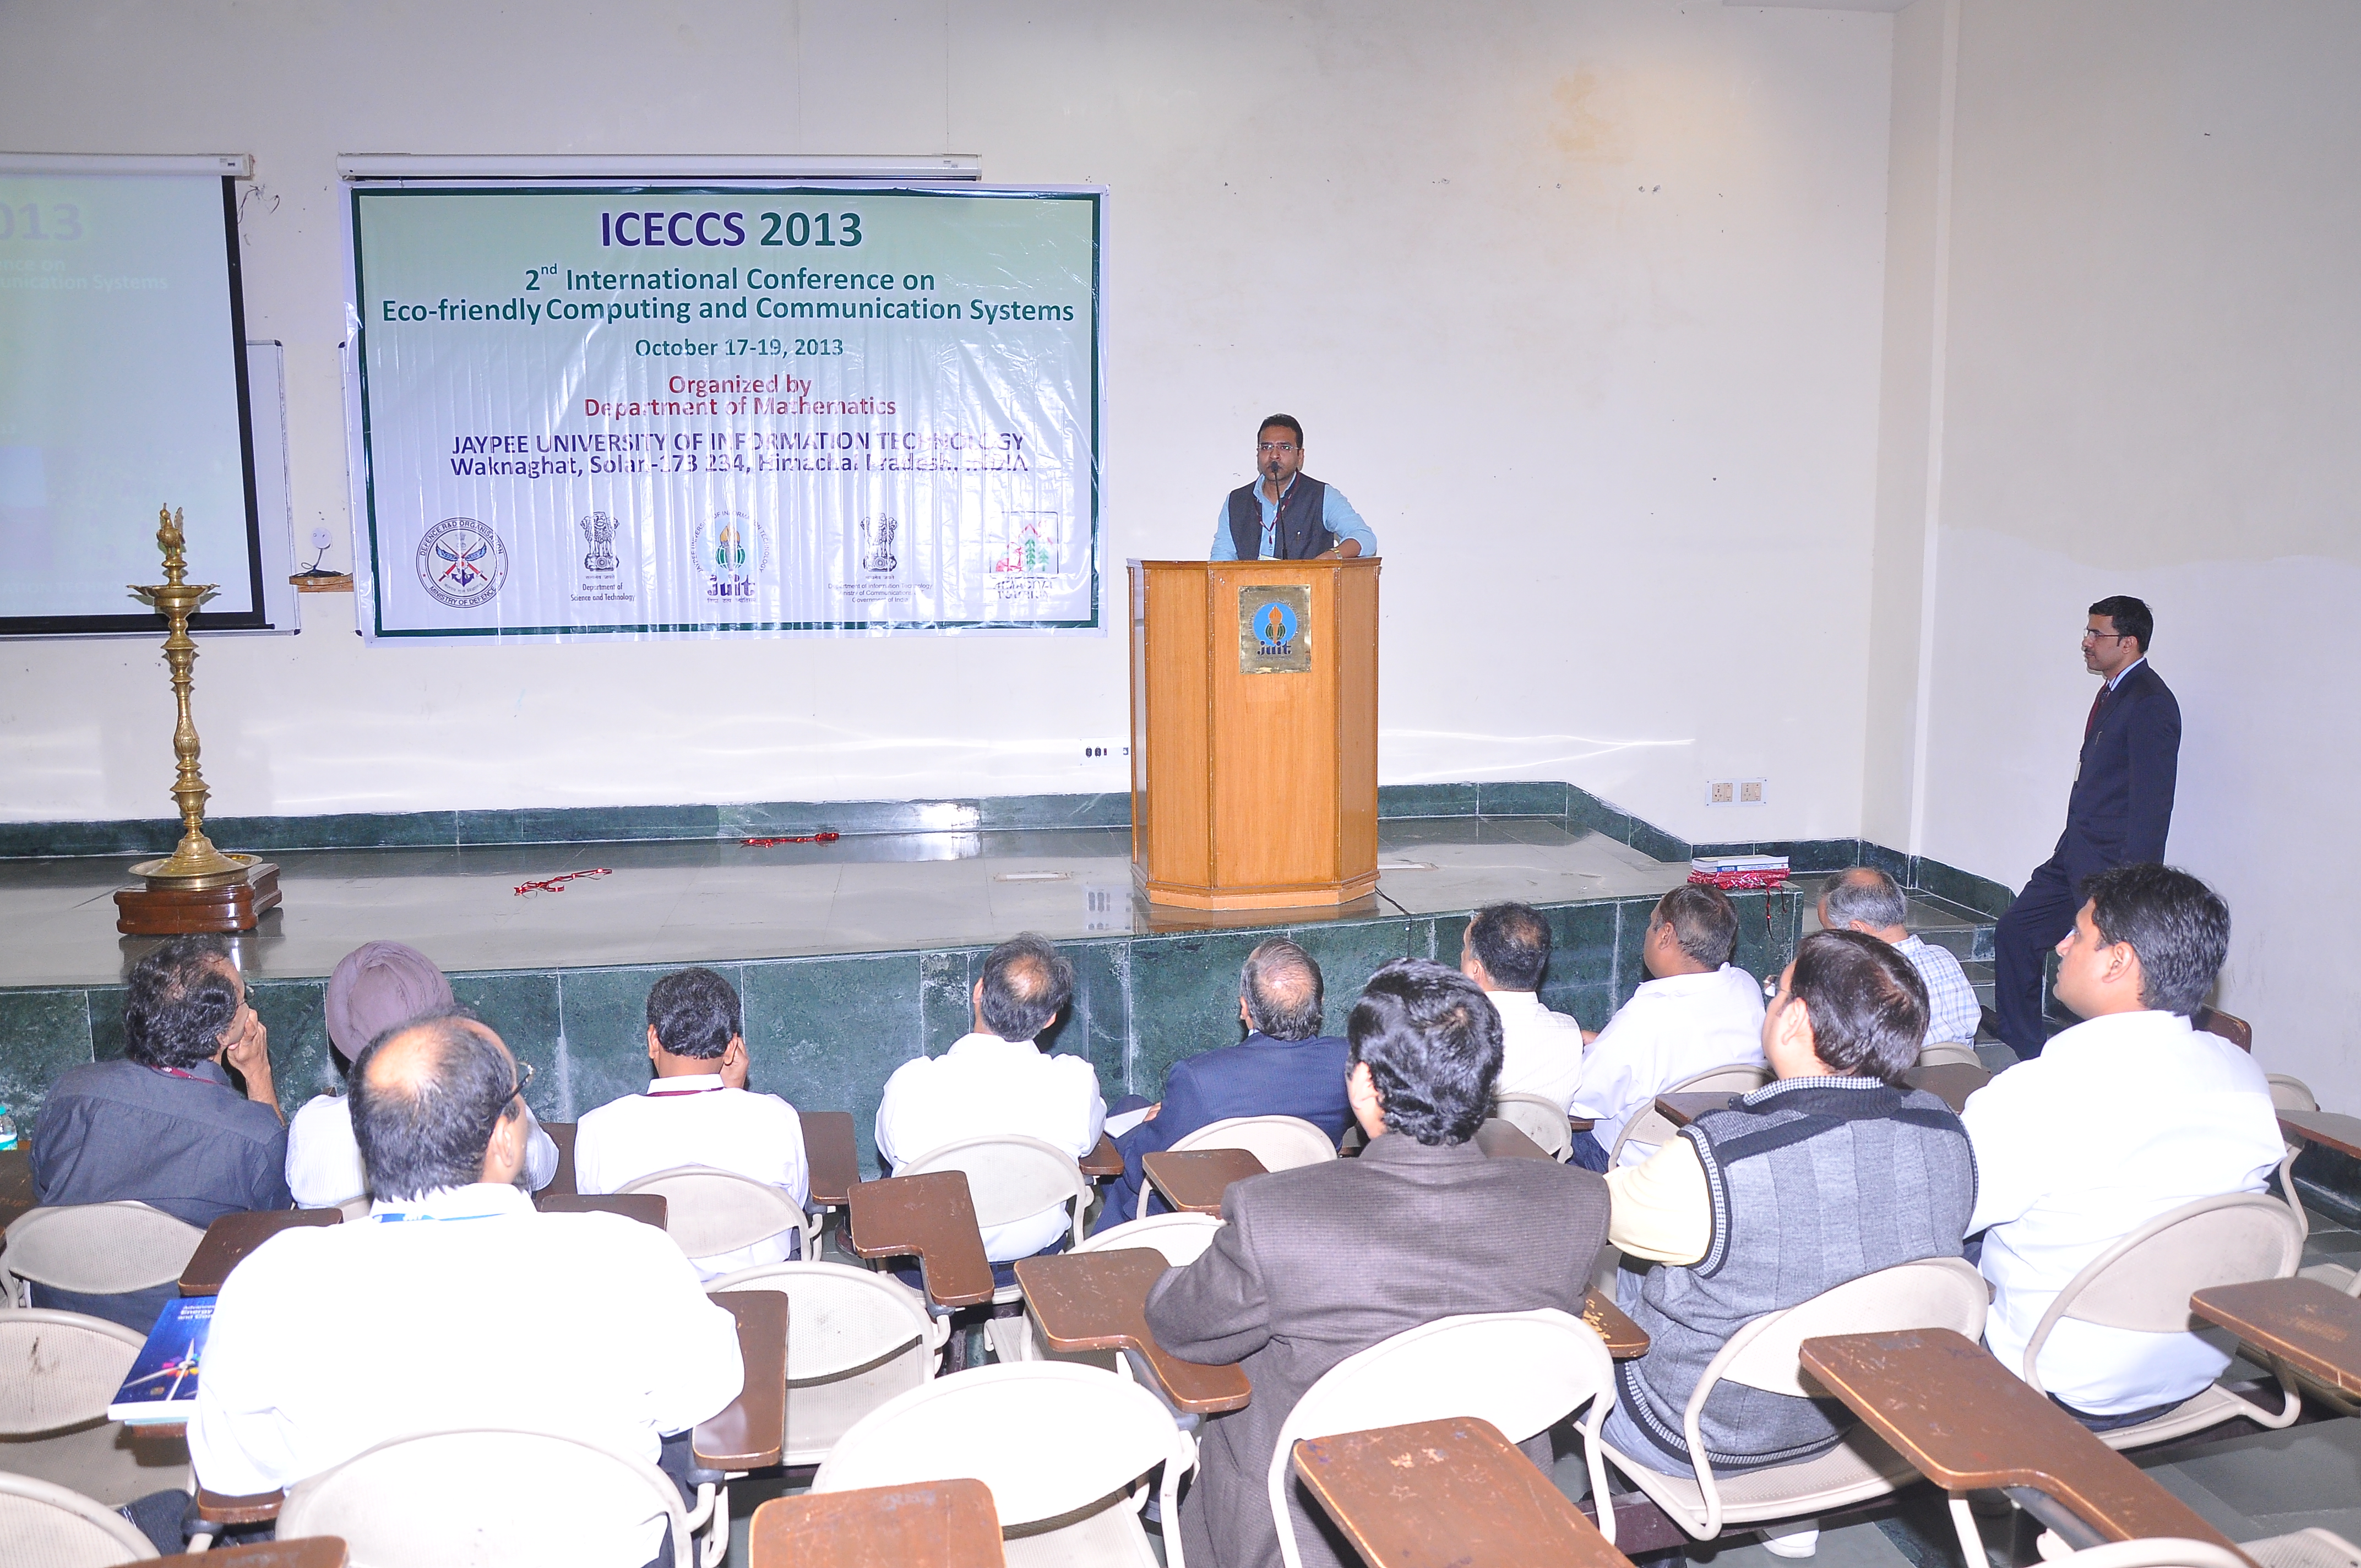 Lecture during 2nd International Conference on Eco-friendly Computing and Commmunication Systems (ICECCS 2013)